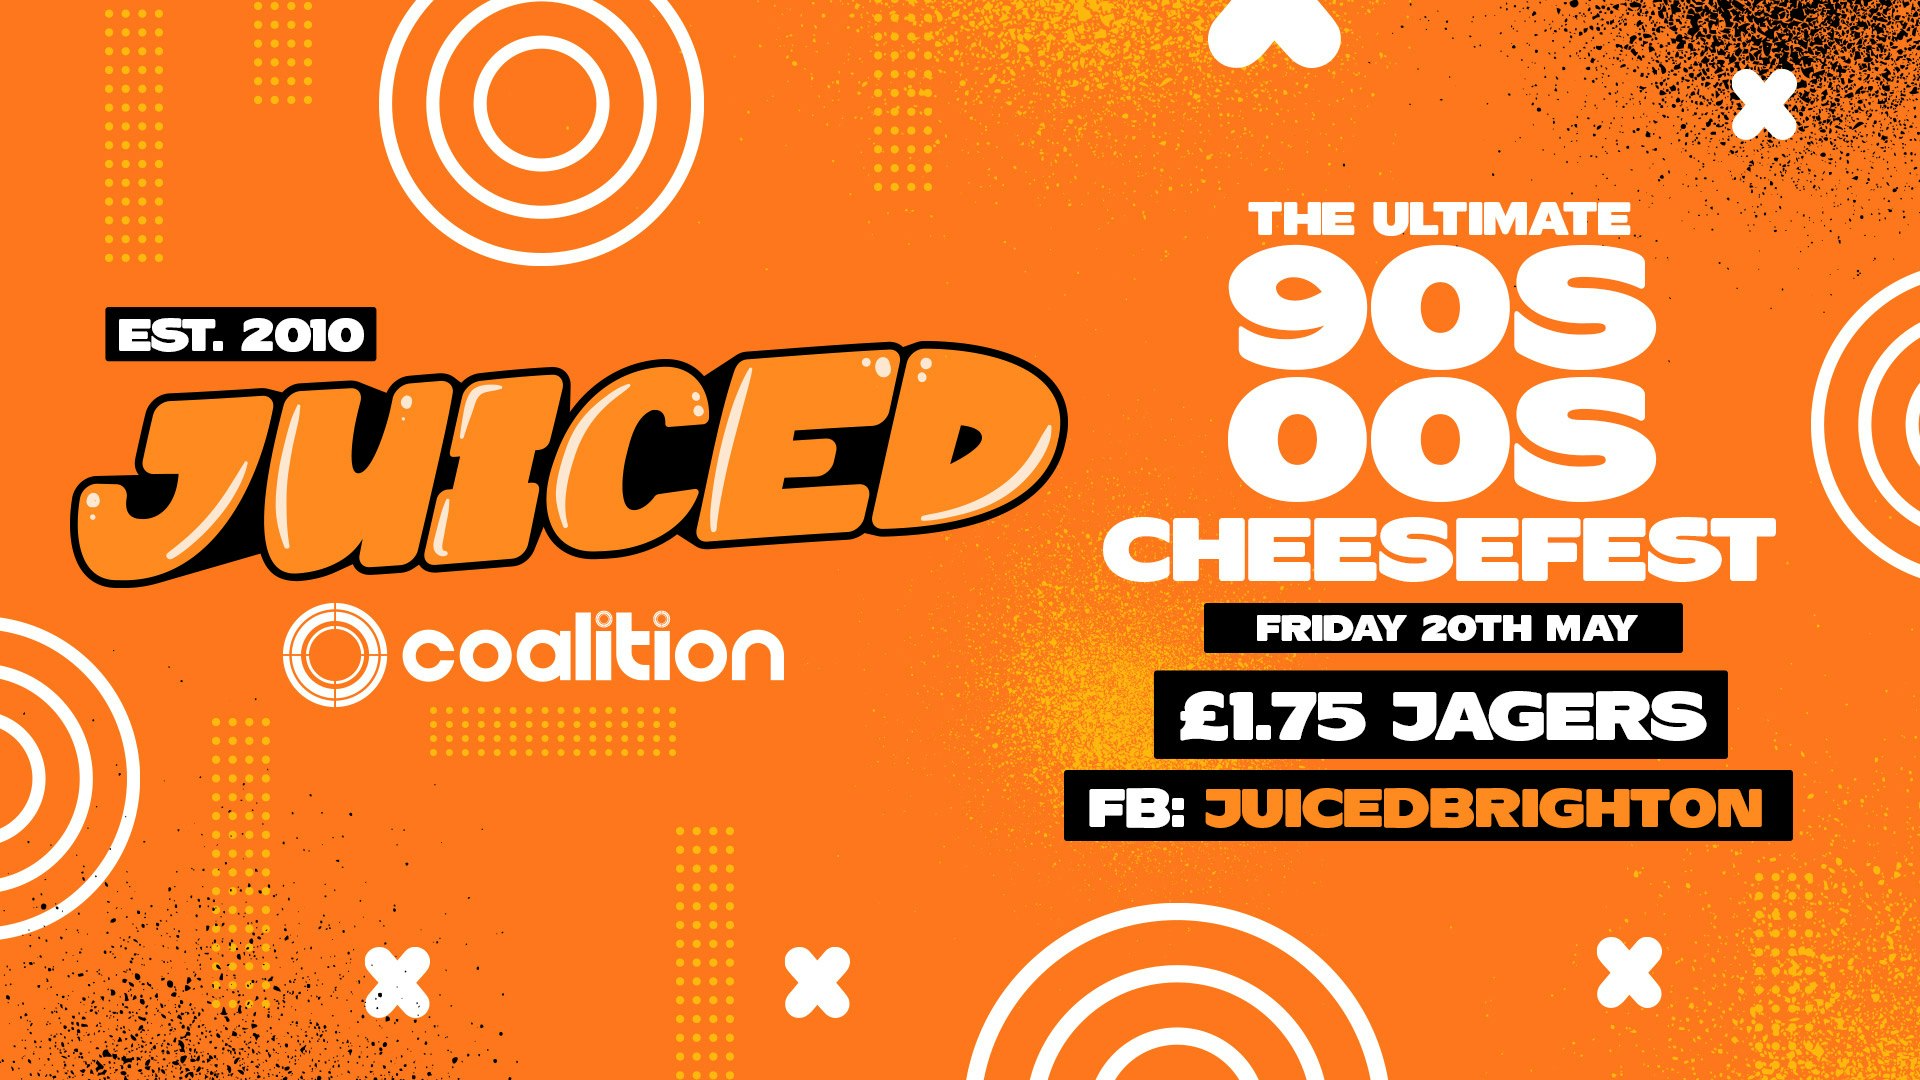 JUICED Fridays x The Ultimate 90s vs 00s Cheesefest | £1.75 Jagers